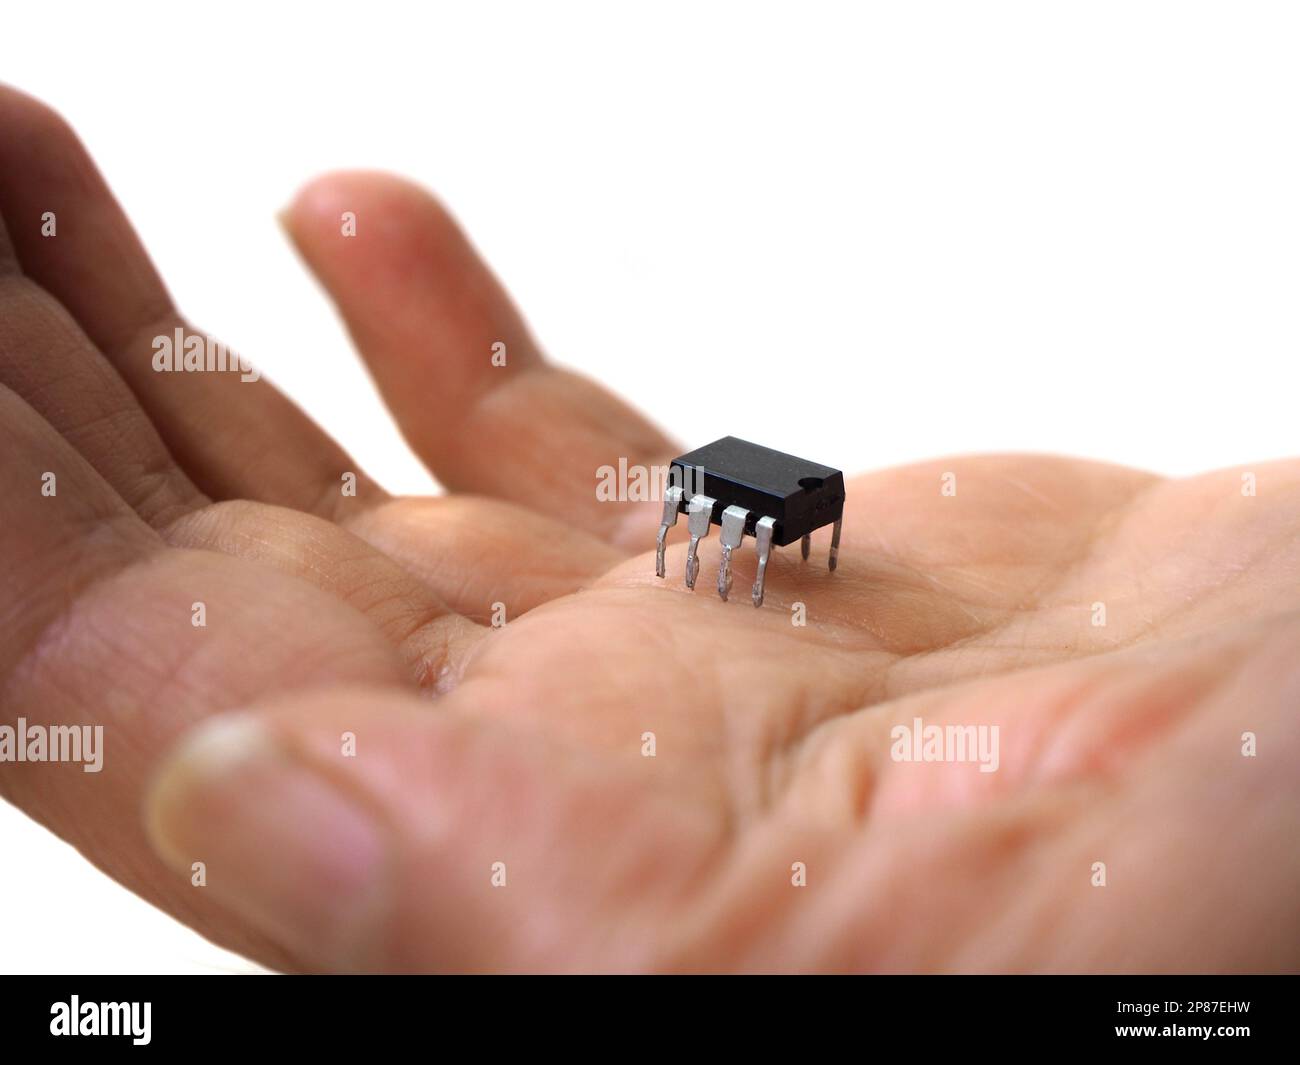 Hand holding an eight-pin chip. Isolated electronic component, integrated circuit. Semiconductor technology. Stock Photo